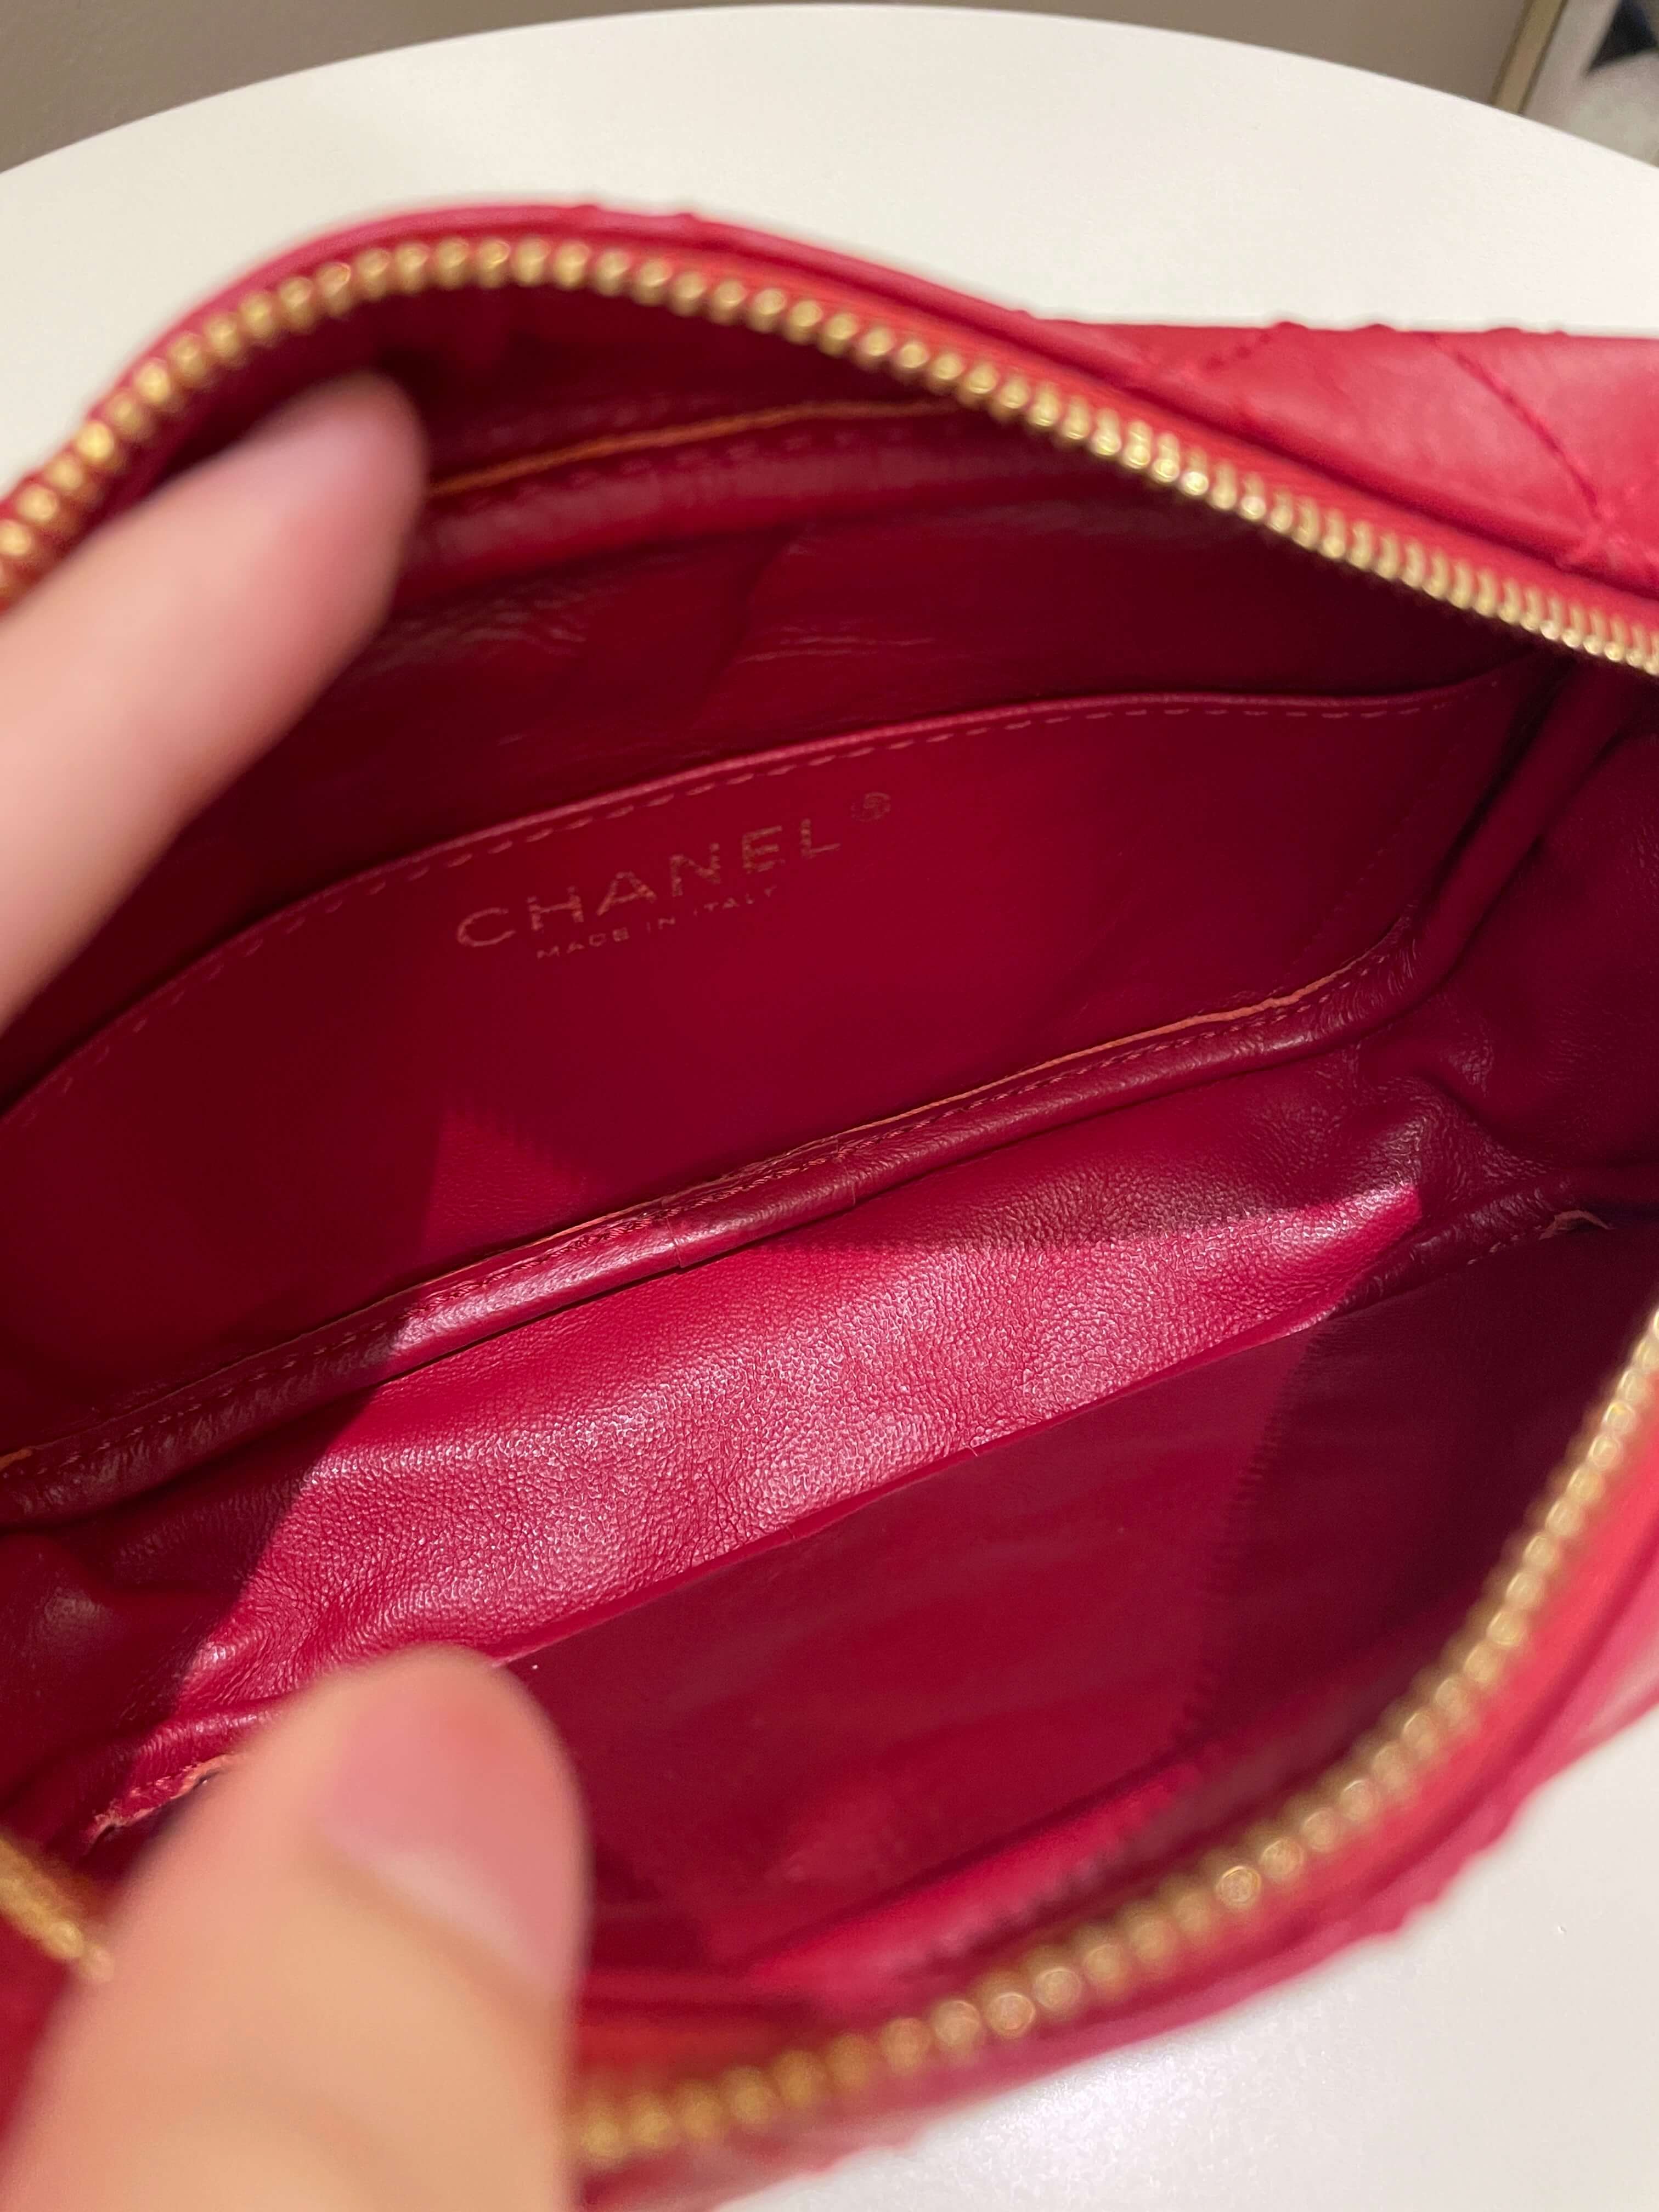 Chanel Quilted 2.55 Reissue Camera Bag Red Aged Calfskin